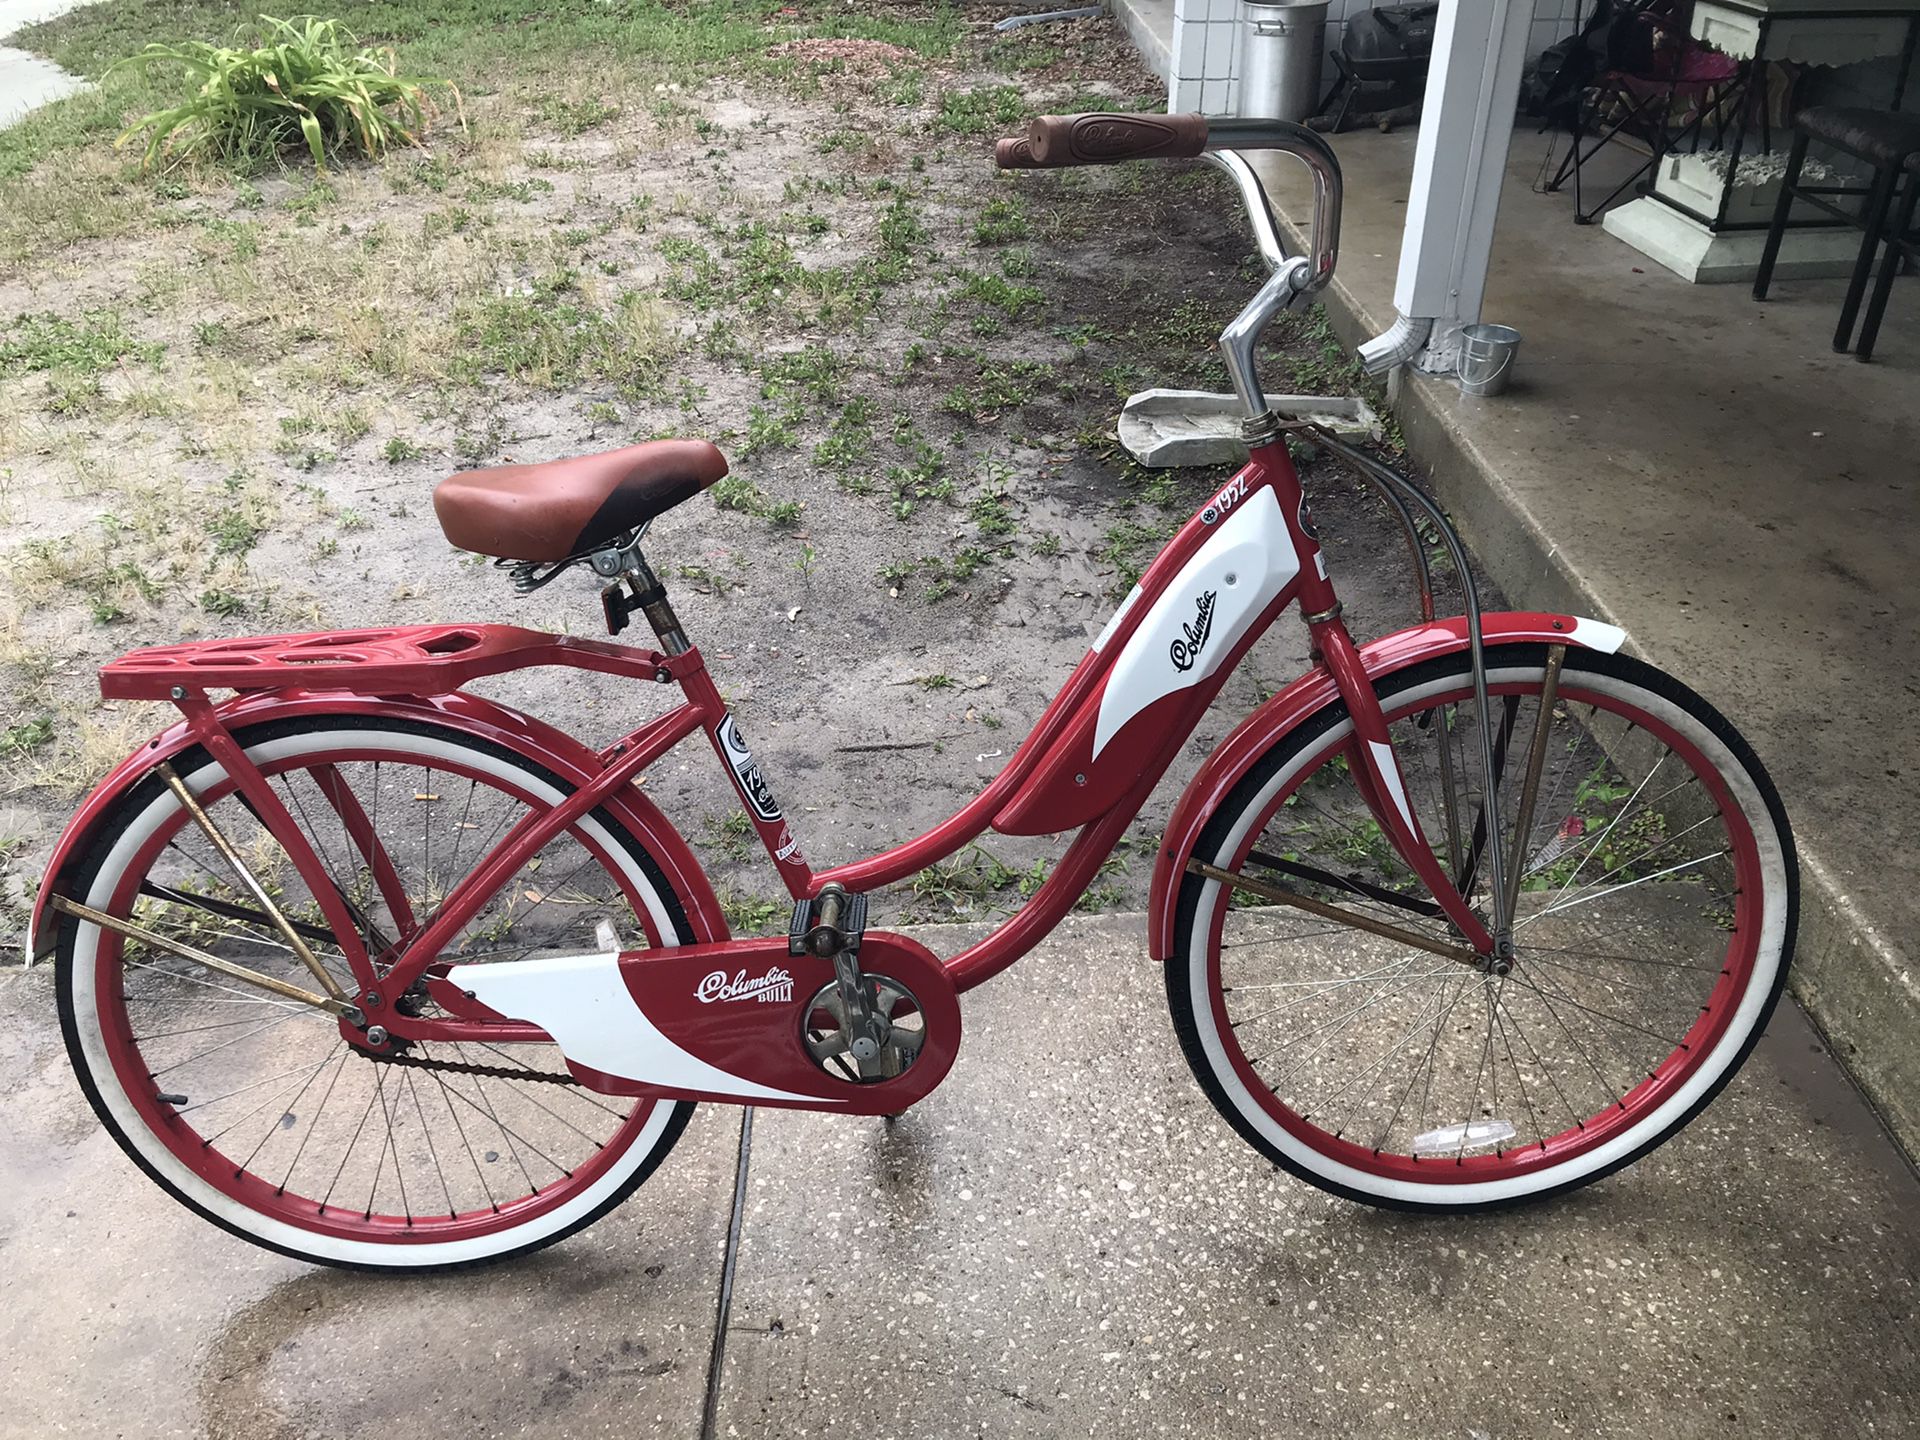 Ready to exercise great bike to let the summer wind blow in your hair it a women 26” 1952 retro Columbia beach cruiser quiet smooth ride if intereste